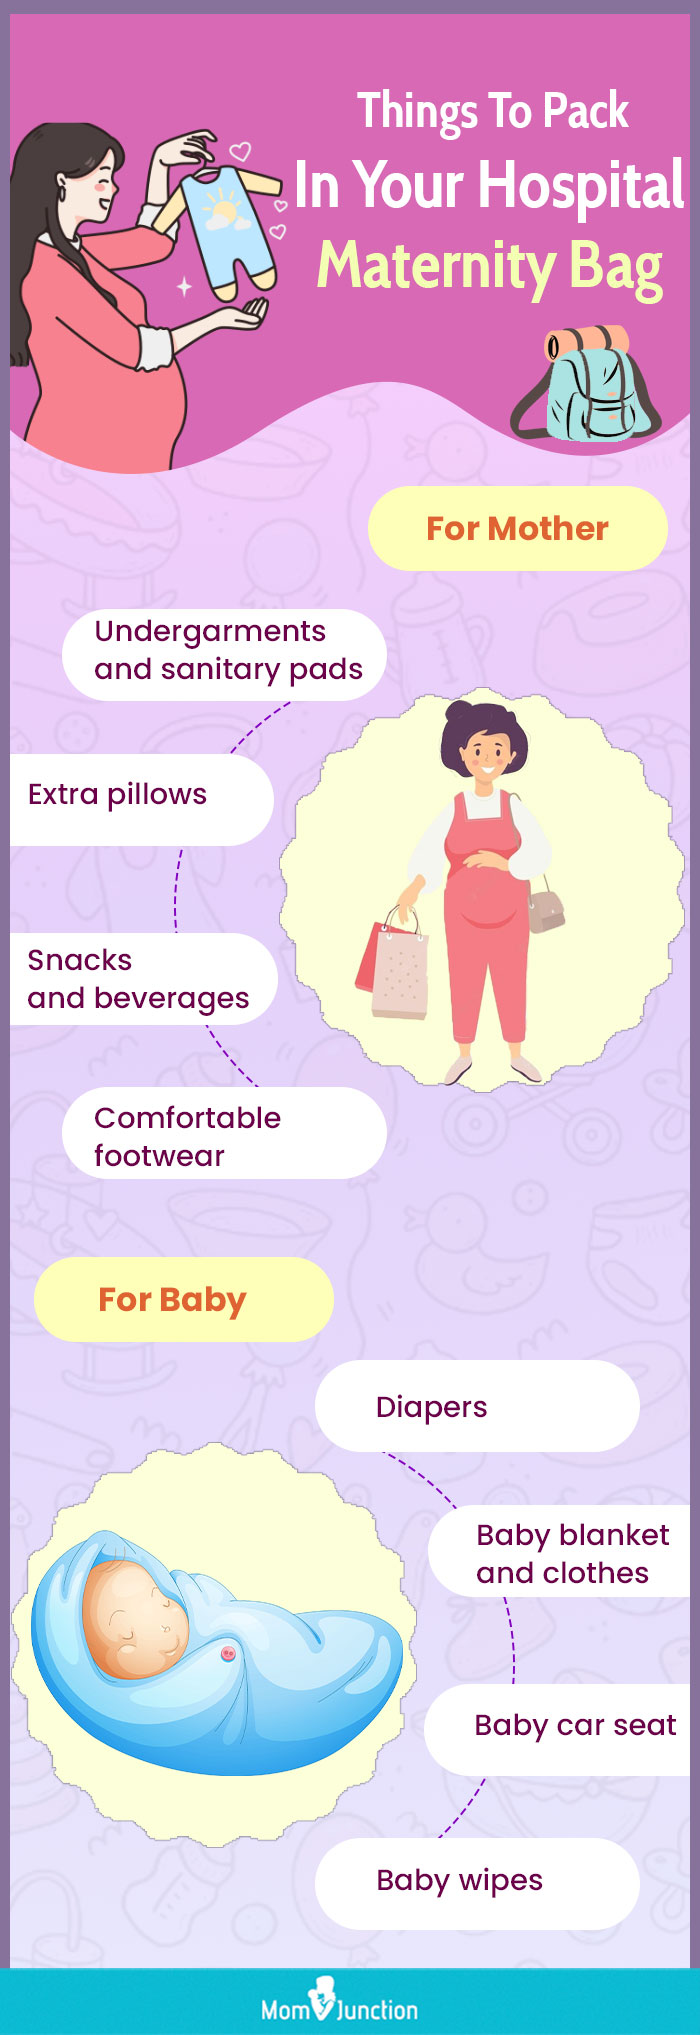 https://www.momjunction.com/wp-content/uploads/2023/06/Things-To-Pack-In-Your-Hospital-Maternity-Bag.jpg